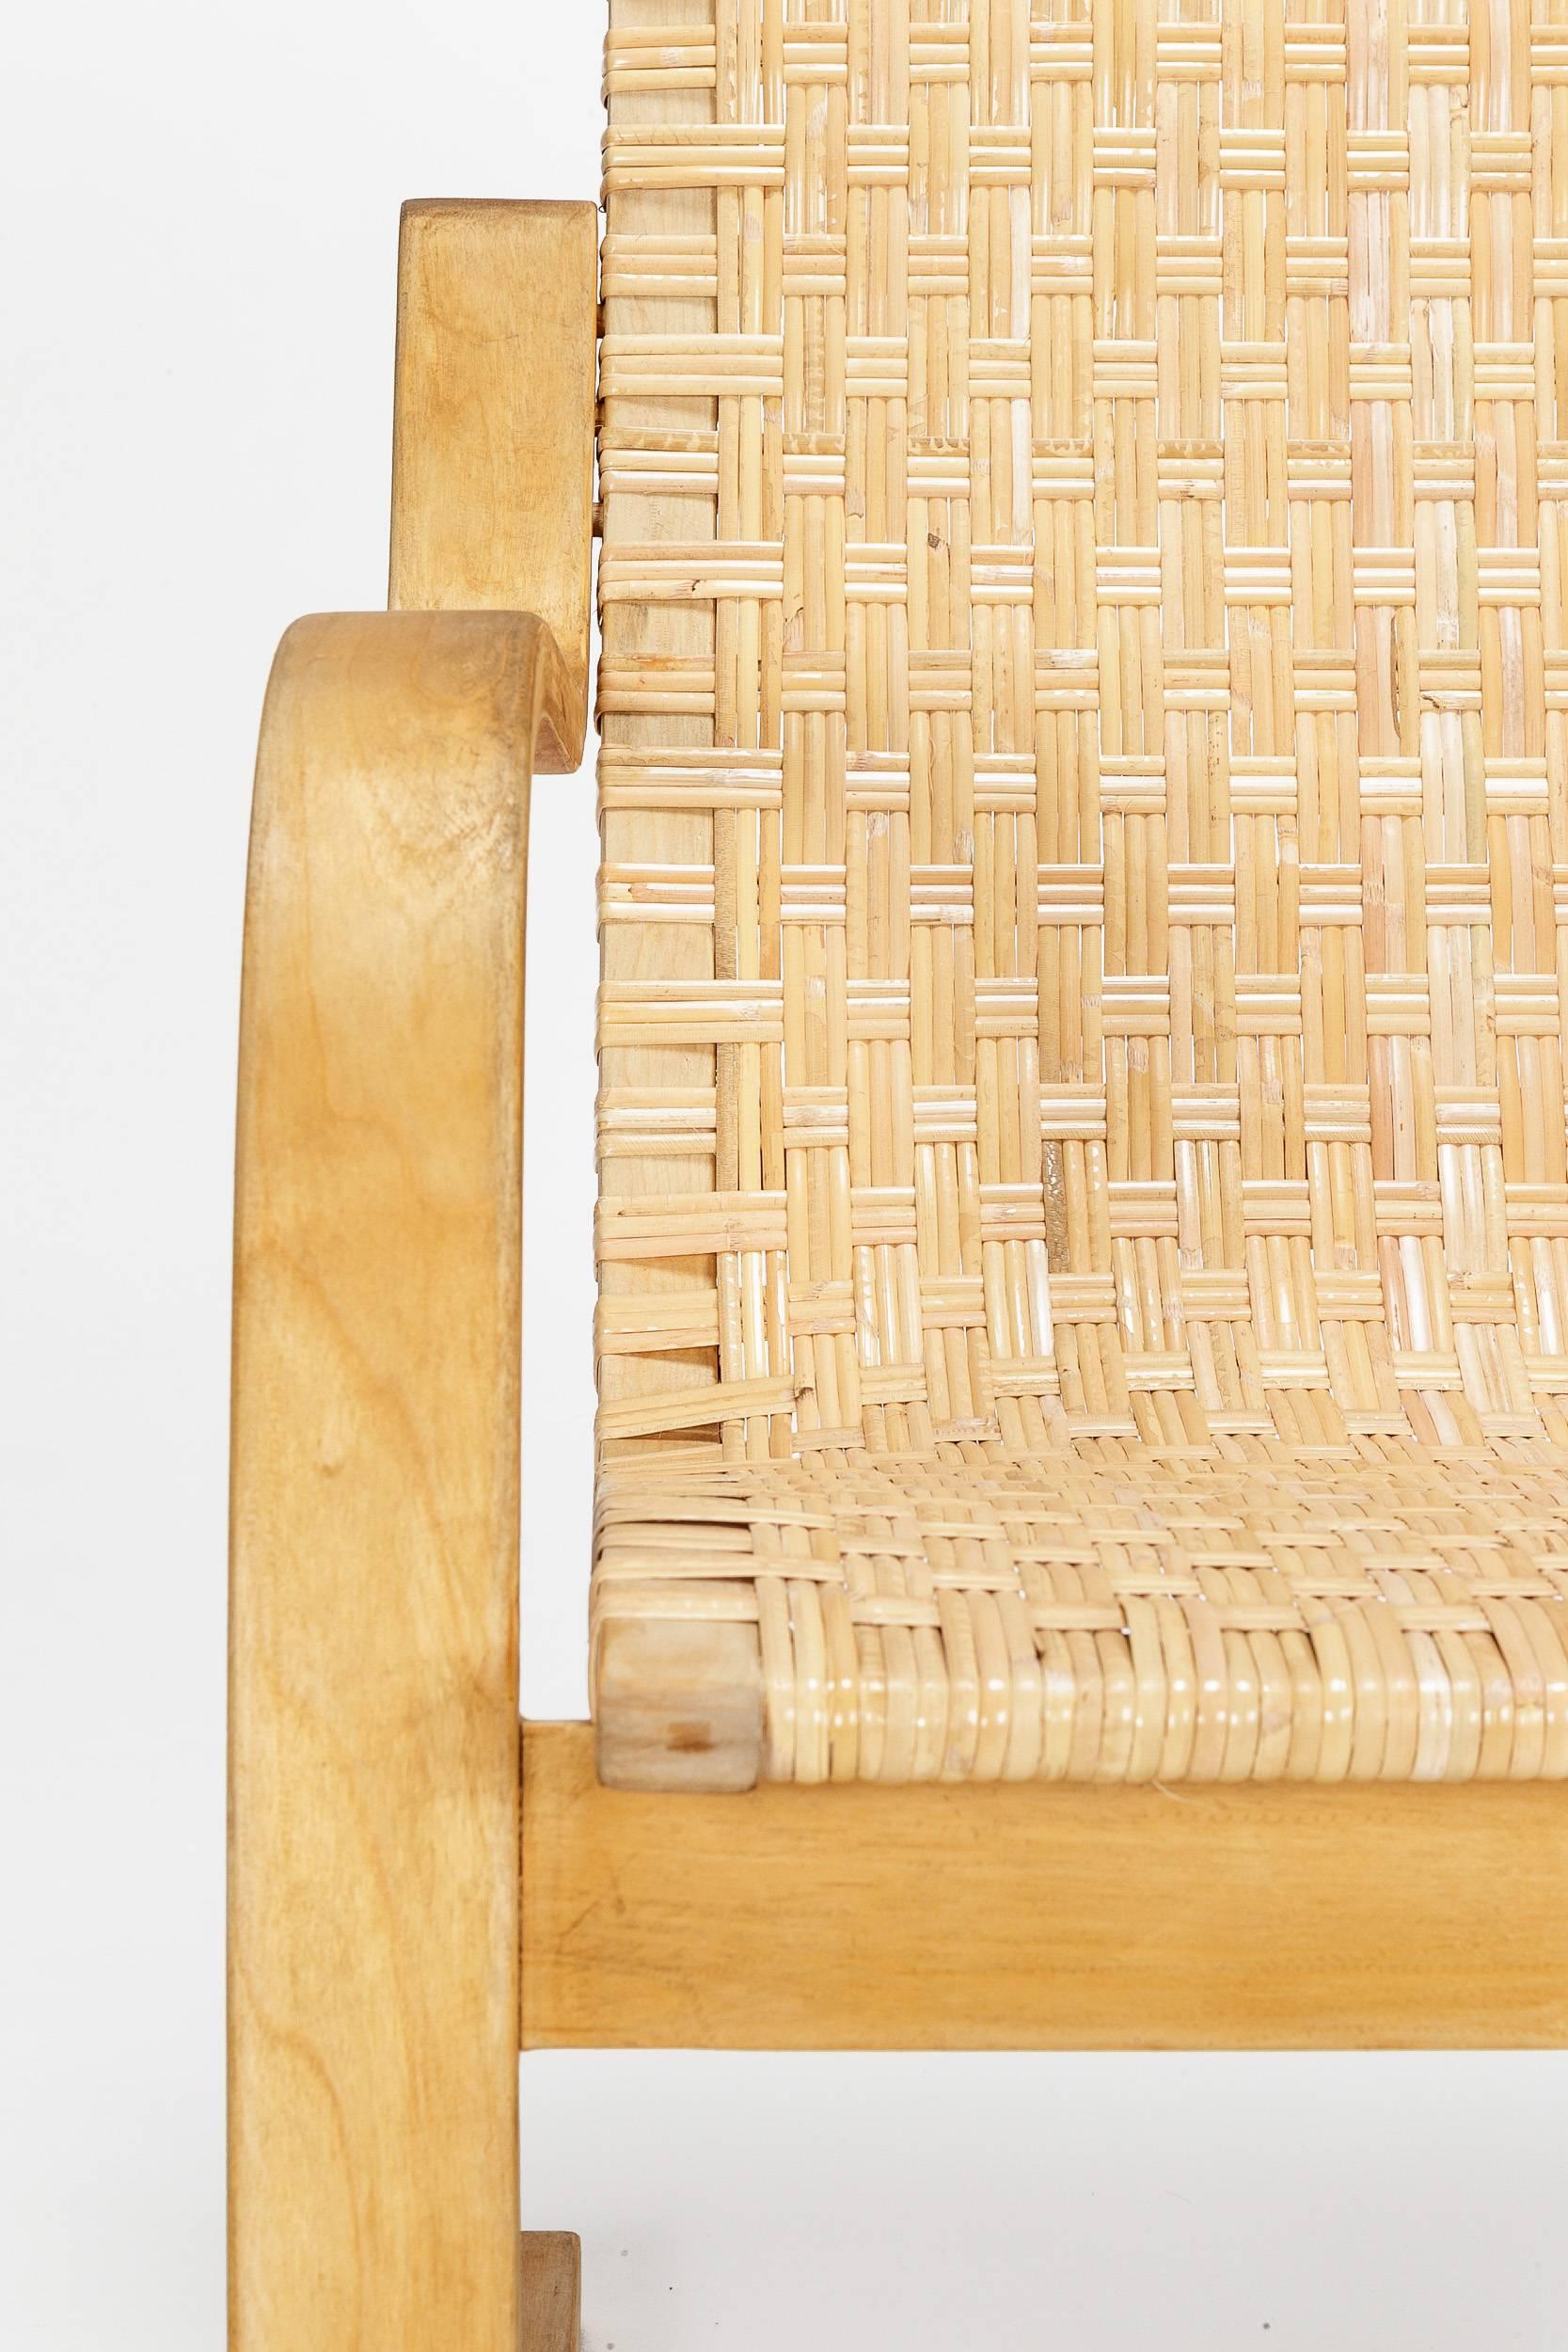 Woven Alvar Aalto Cantilever Chair 406 by Artek in Birch and Cane Webbing